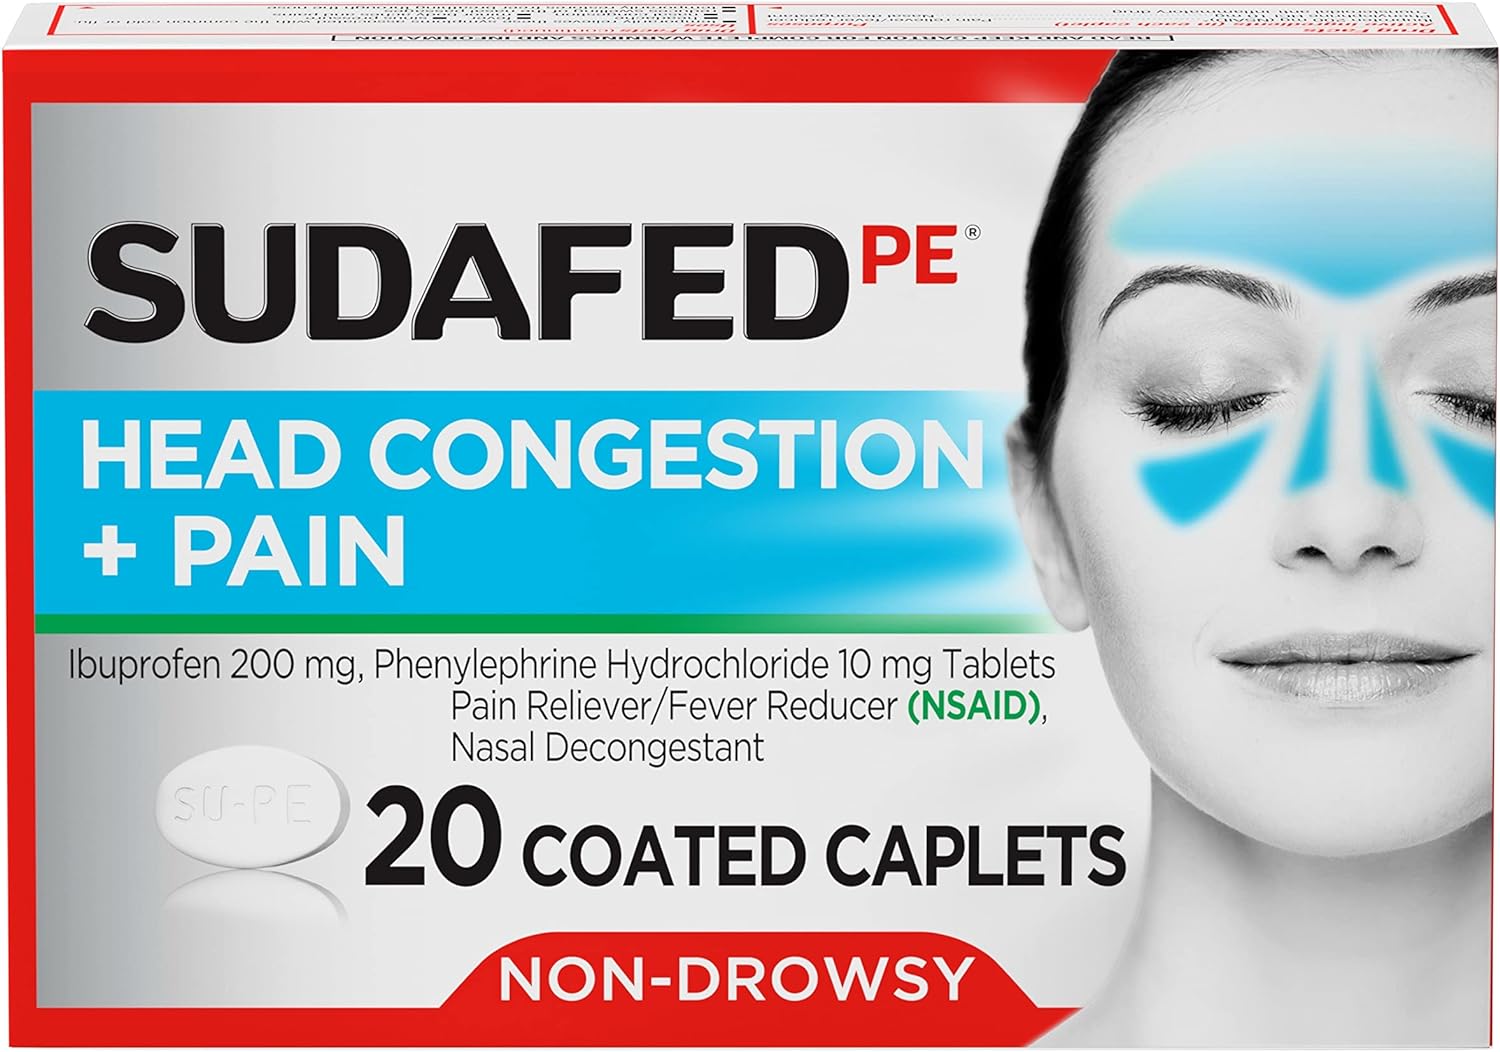 Sudafed PE Head Congestion + Pain Relief Caplets Ibuprofen Phenylephrine HCl, 20 Count